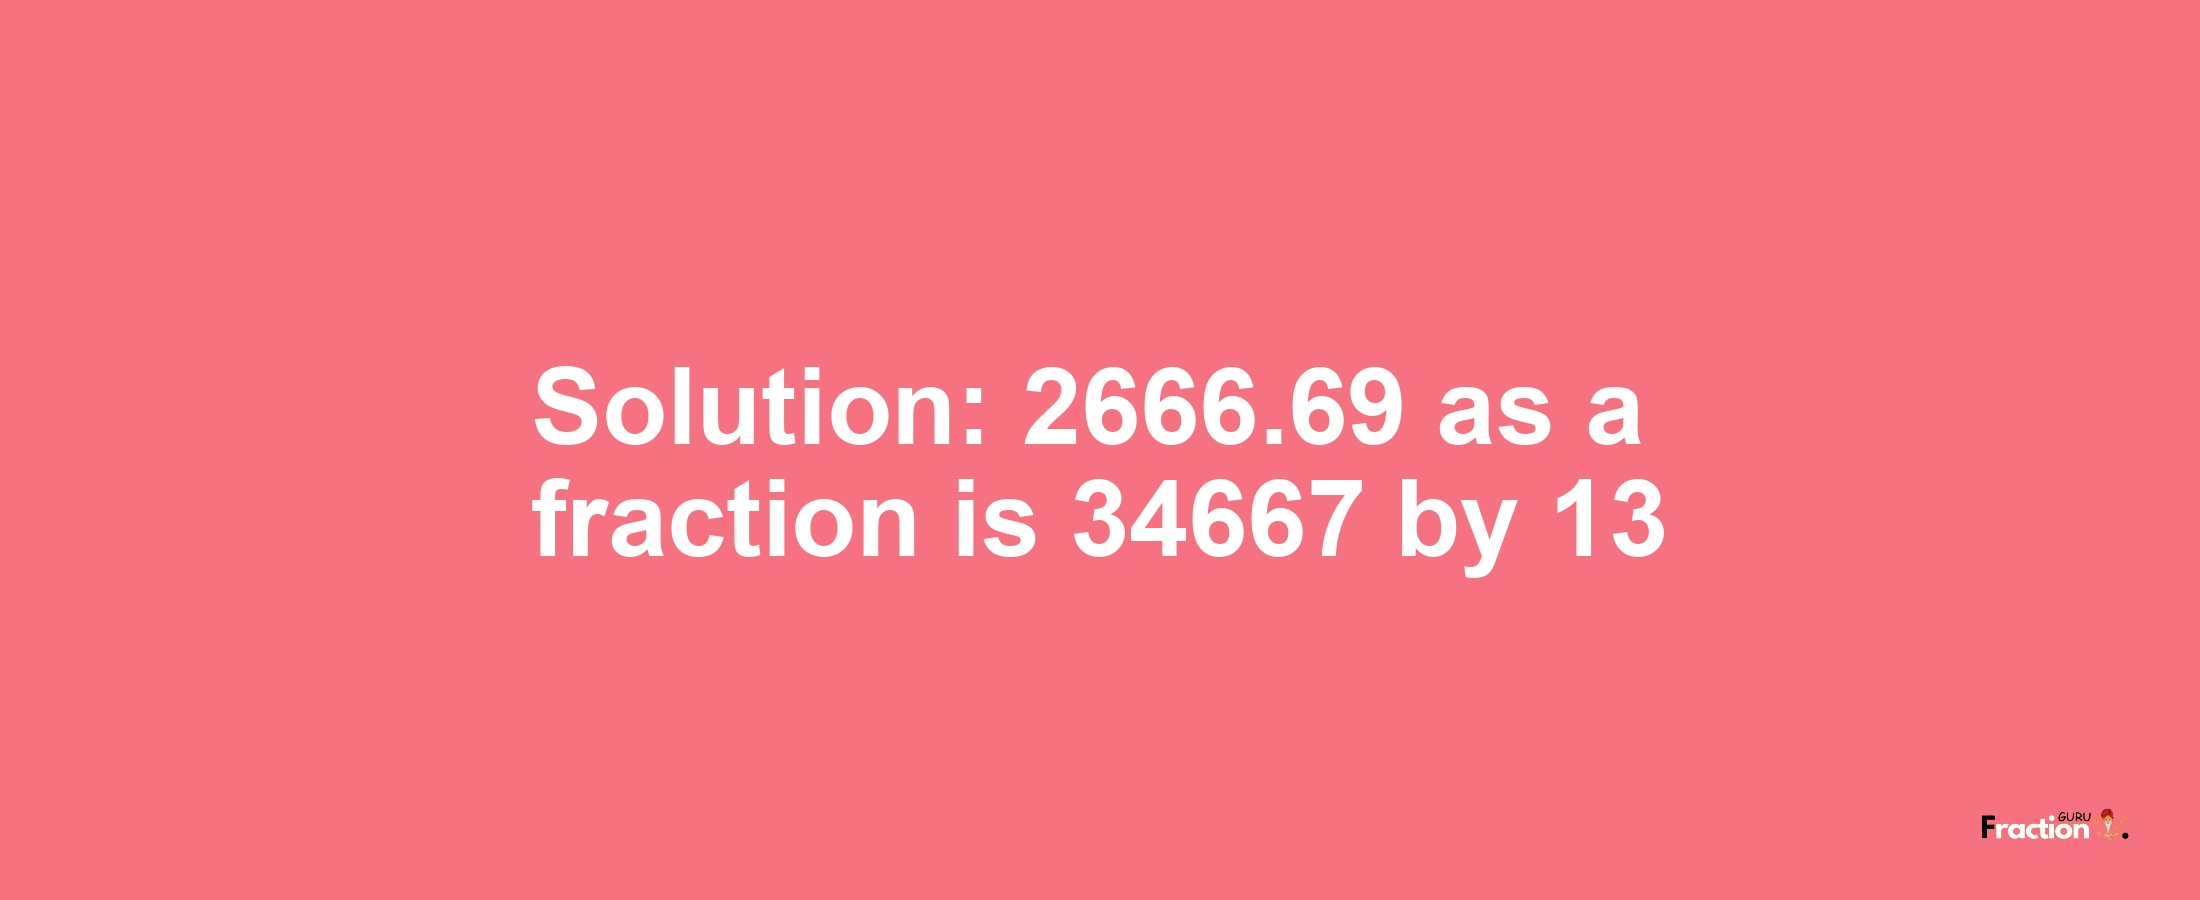 Solution:2666.69 as a fraction is 34667/13